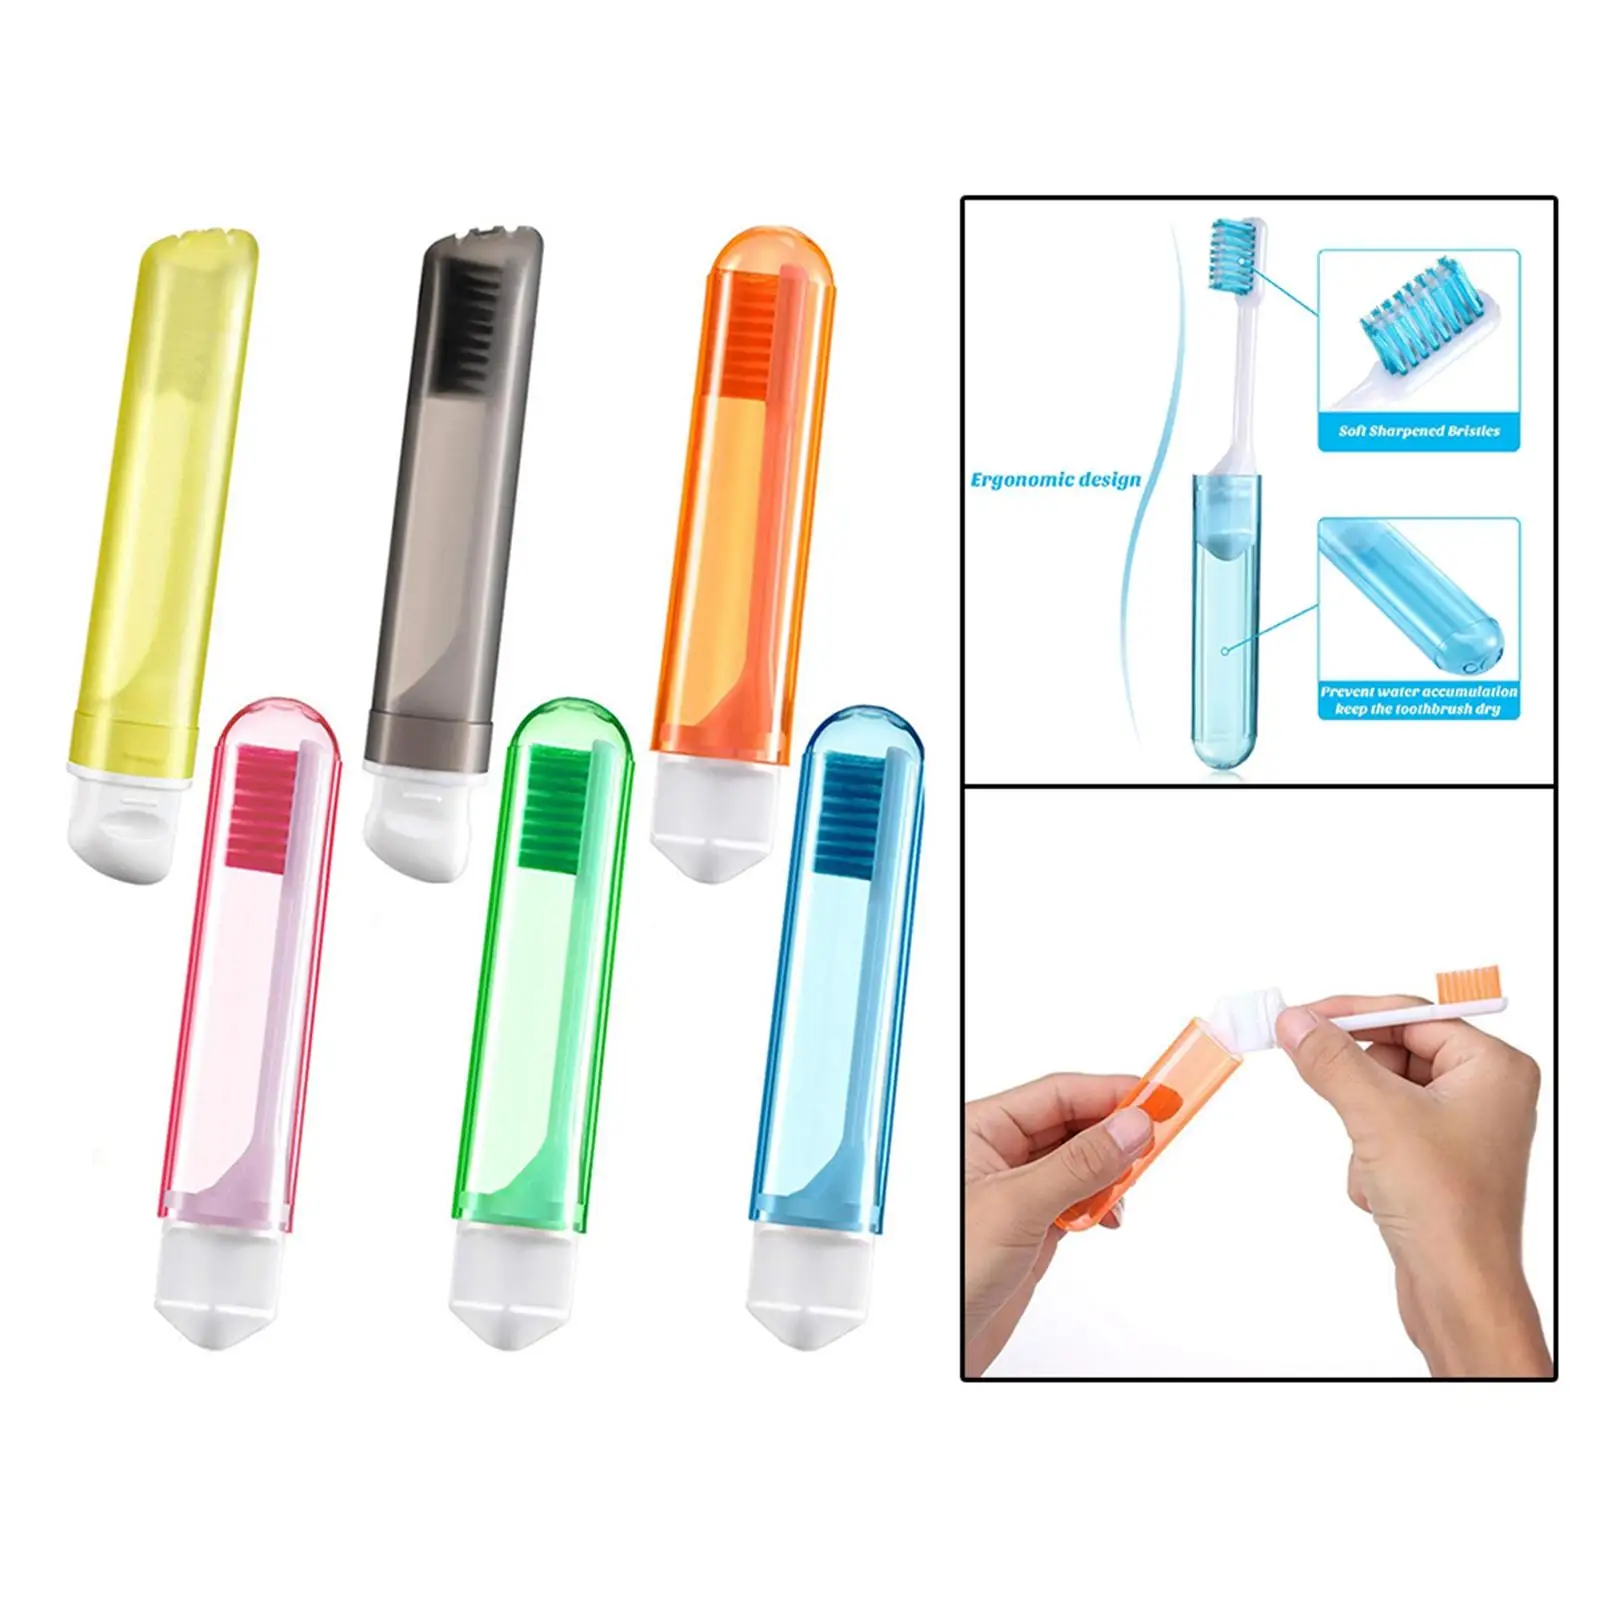 Portable Folding Toothbrush Foldable Soft Bristle Travel Size Travel Toothbrush for Camping Backpack Travel Hiking Kids Adults